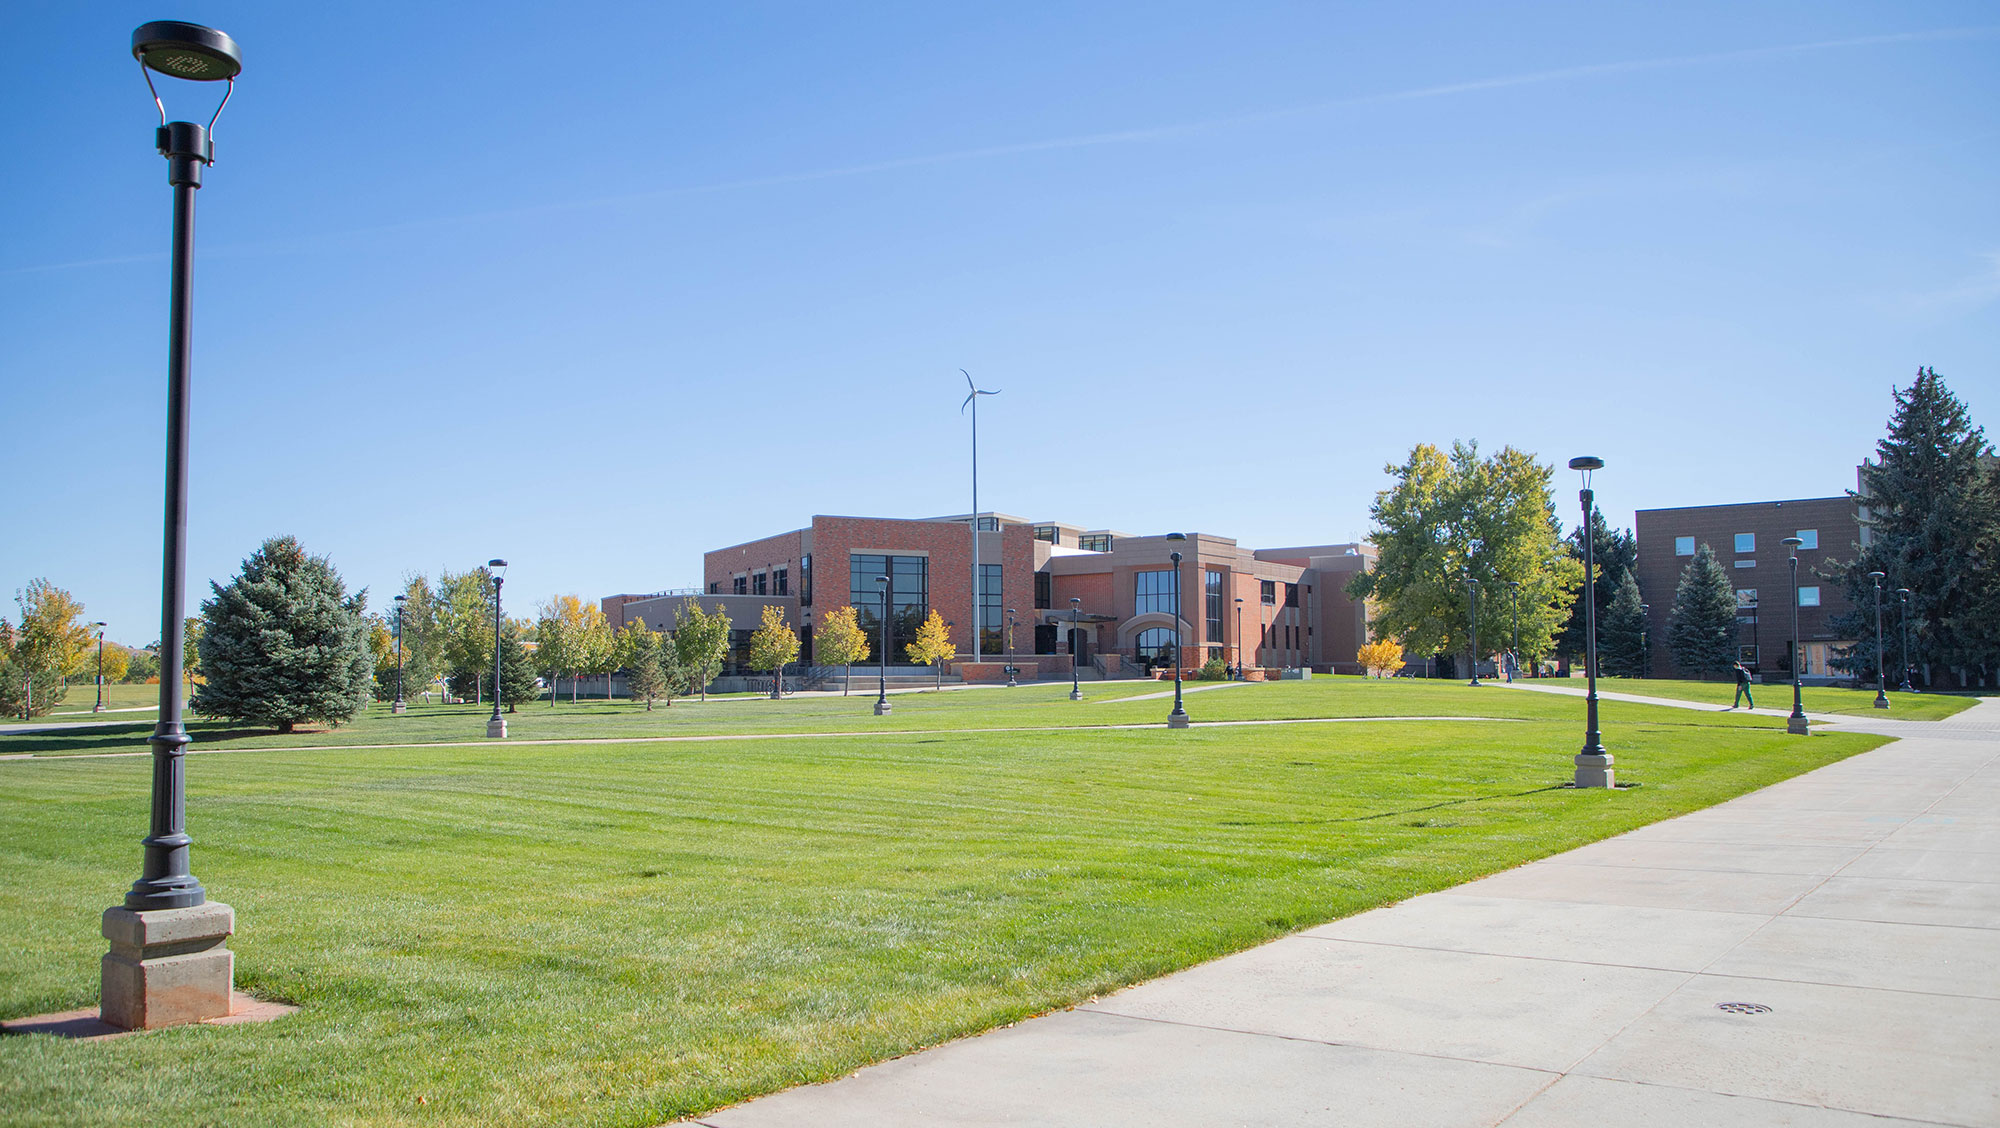 The BHSU student union on a sunny day